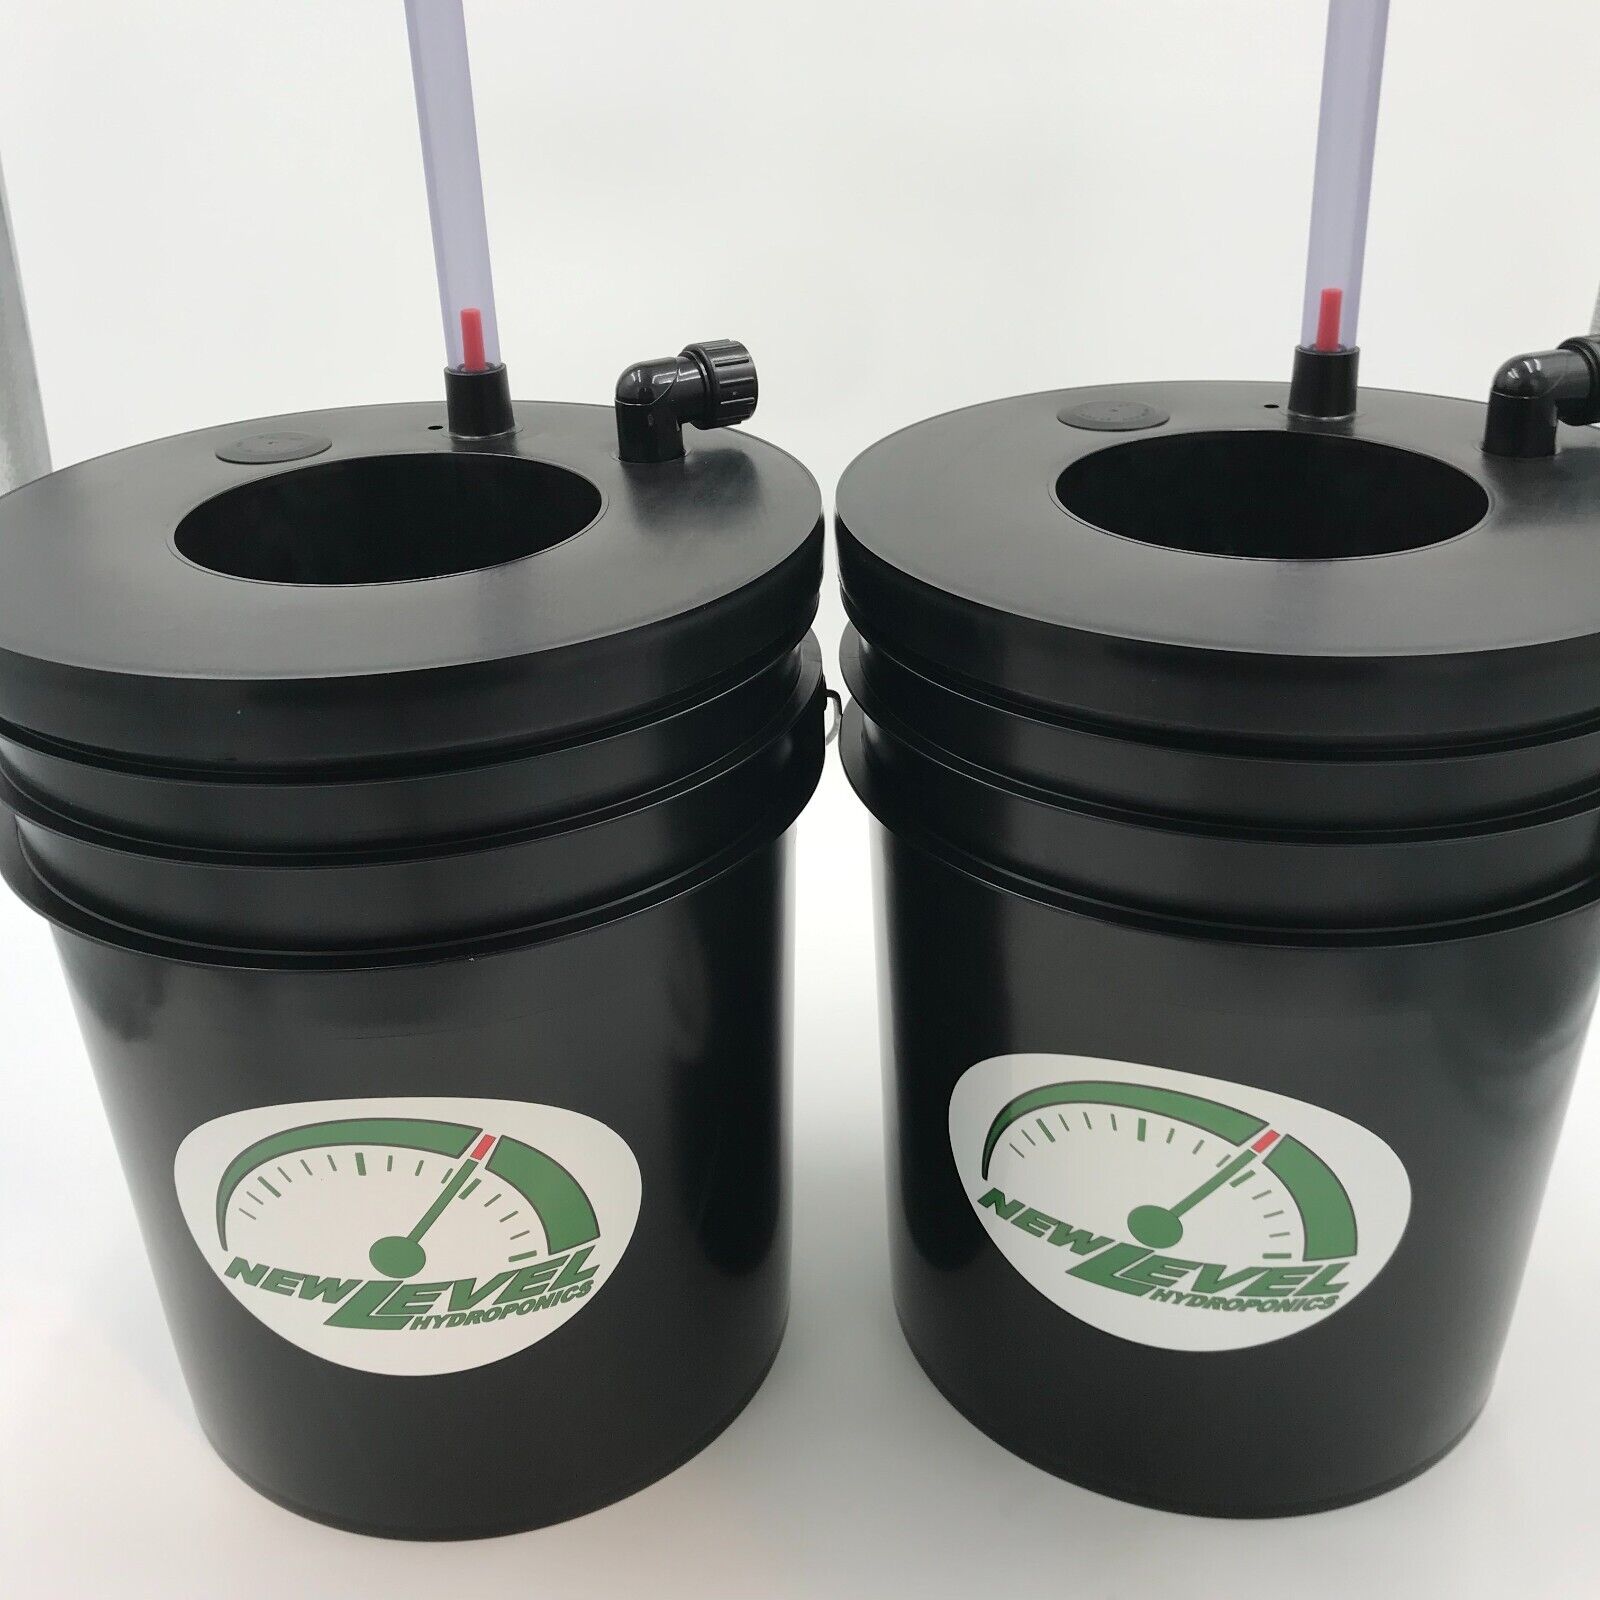 2 Bucket and Grow LID DWC combo - NEW LEVEL HYDROPONICS  -  3.5 or 5 gallon